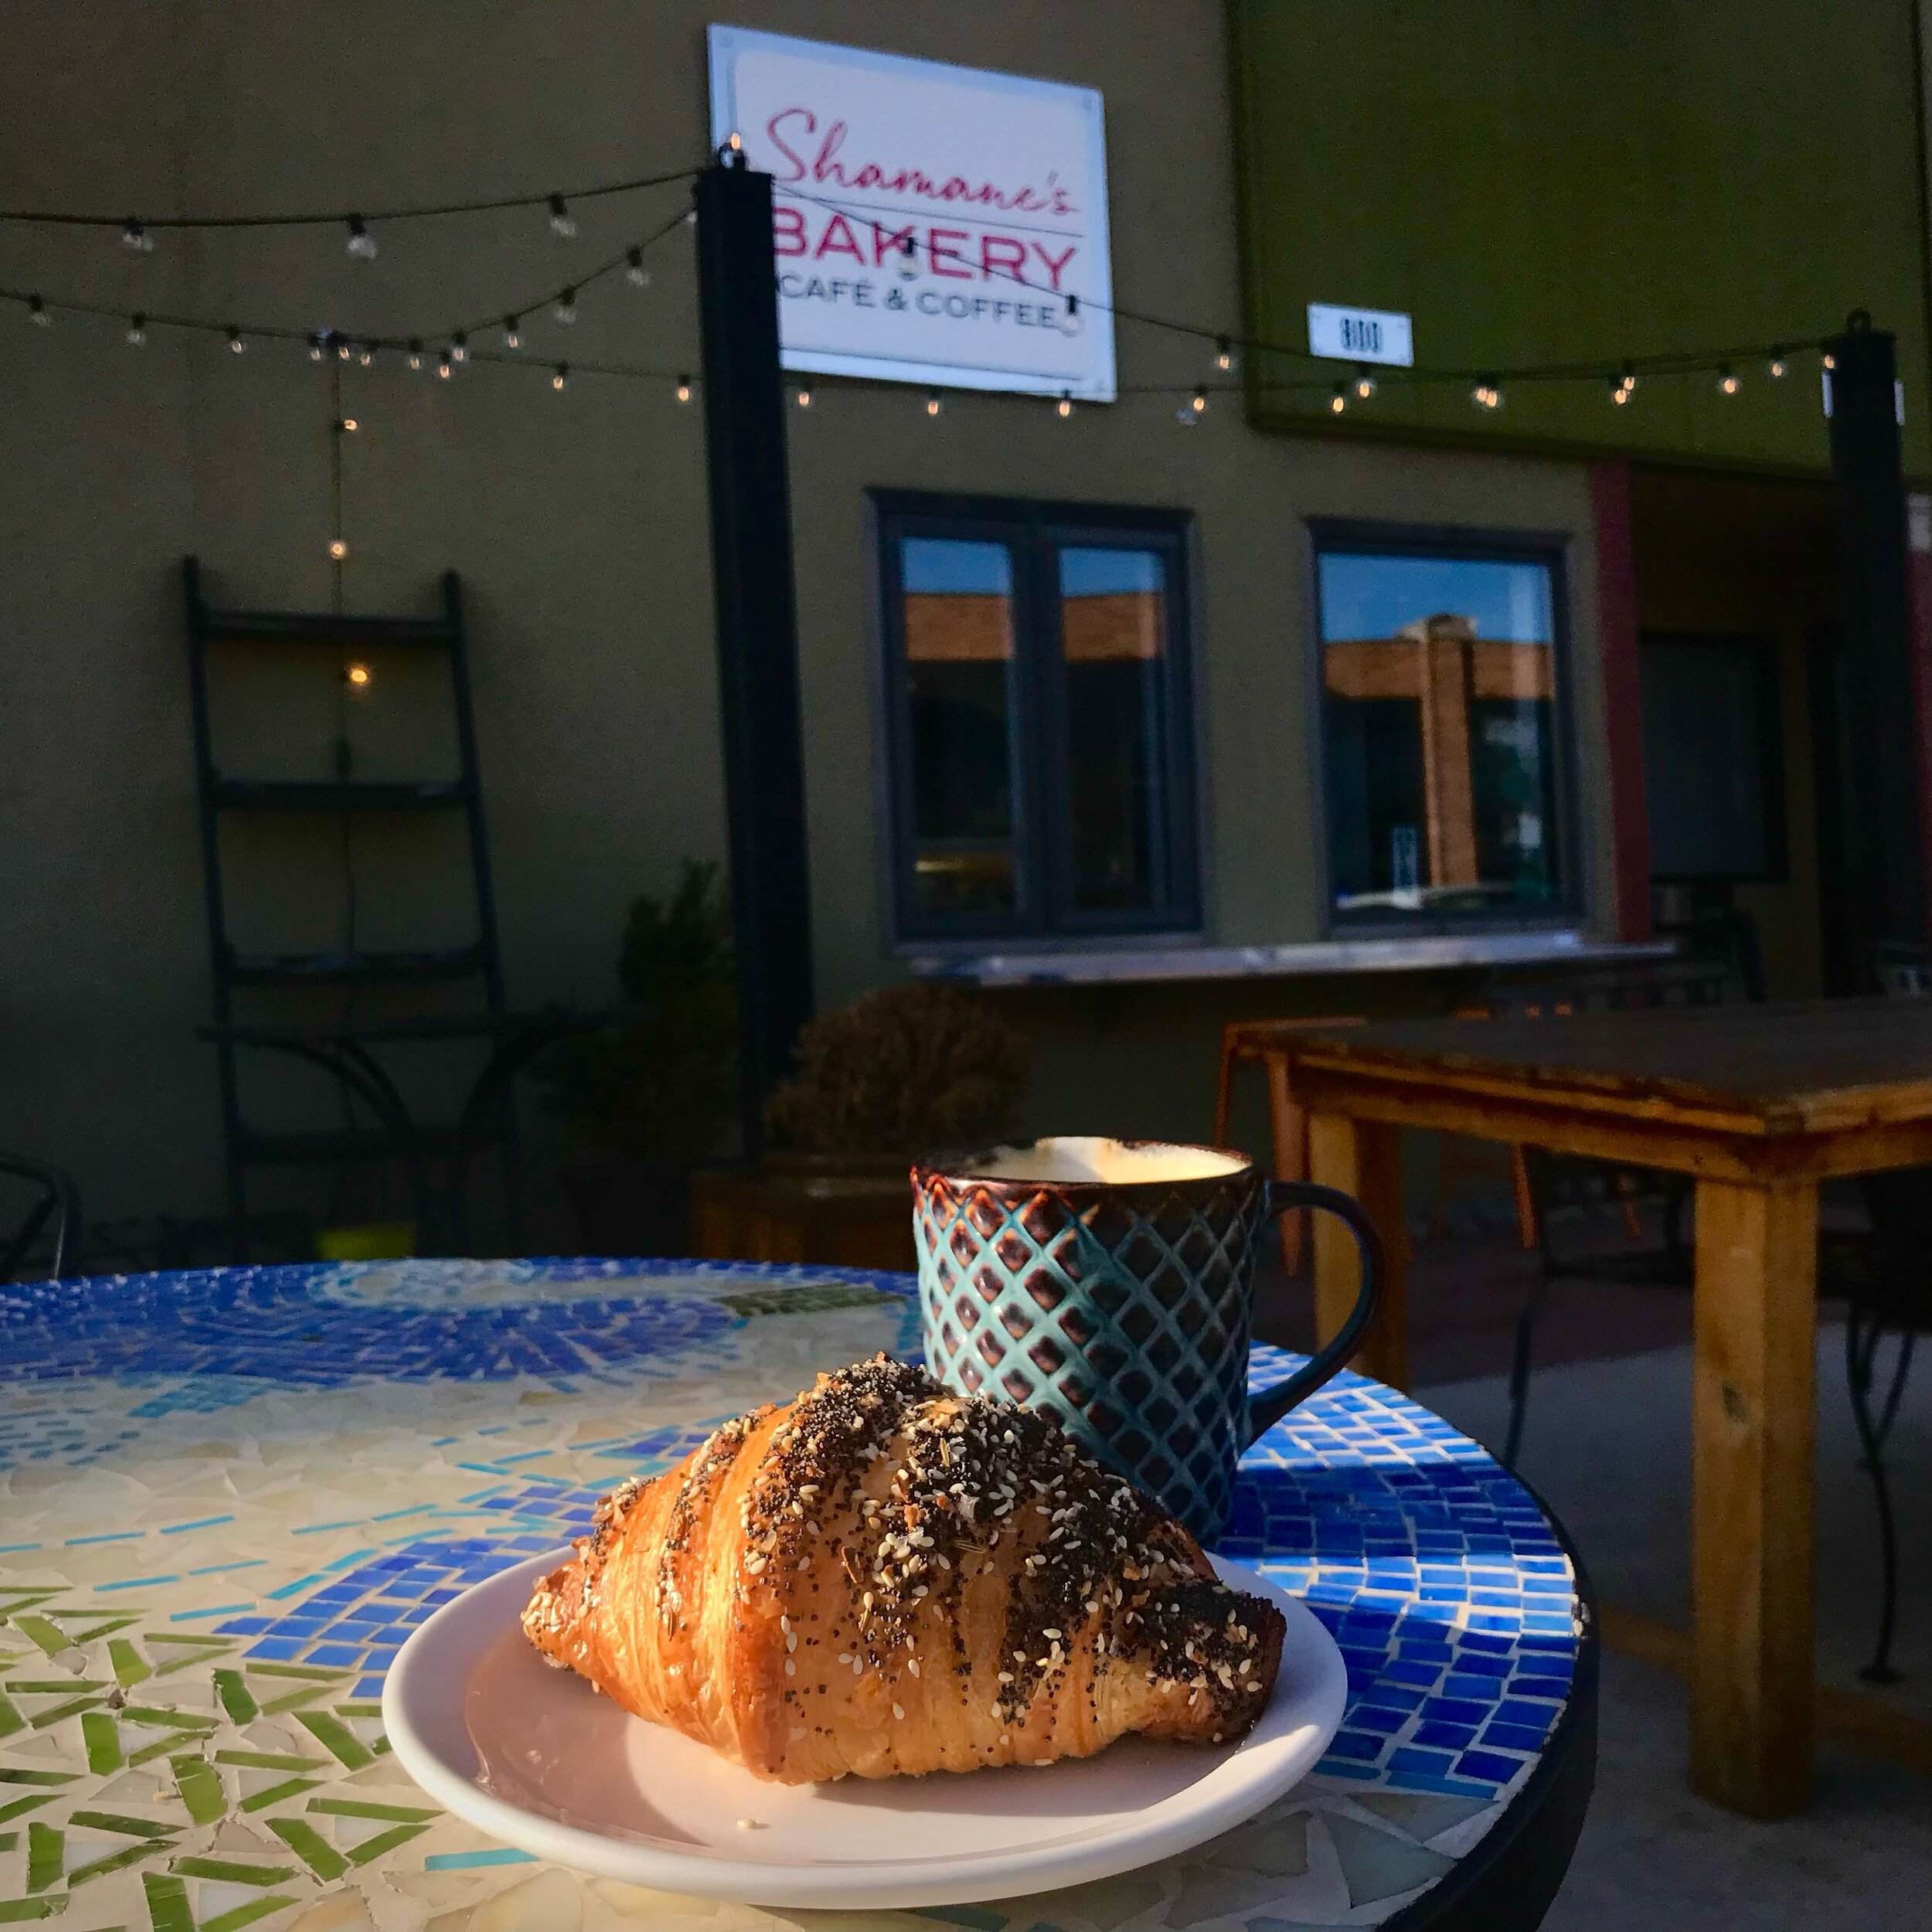 It&rsquo;s a beautiful day in Boulder, CO! Stop in to enjoy sunshine and pastries &ndash; the perfect pair for a delightful day! ☀️🥐